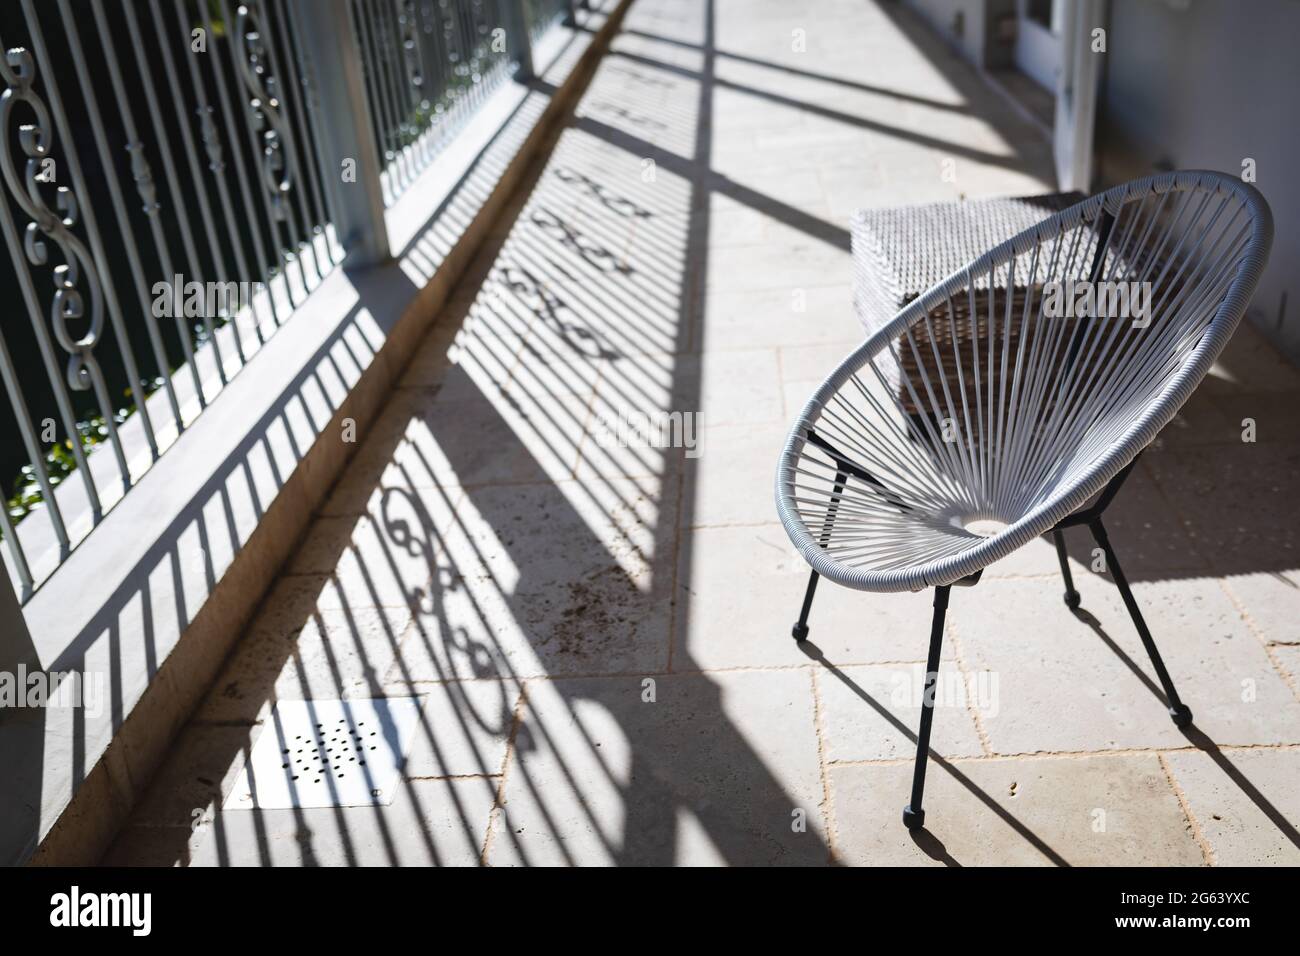 General view of round chair on a sunny balcony Stock Photo